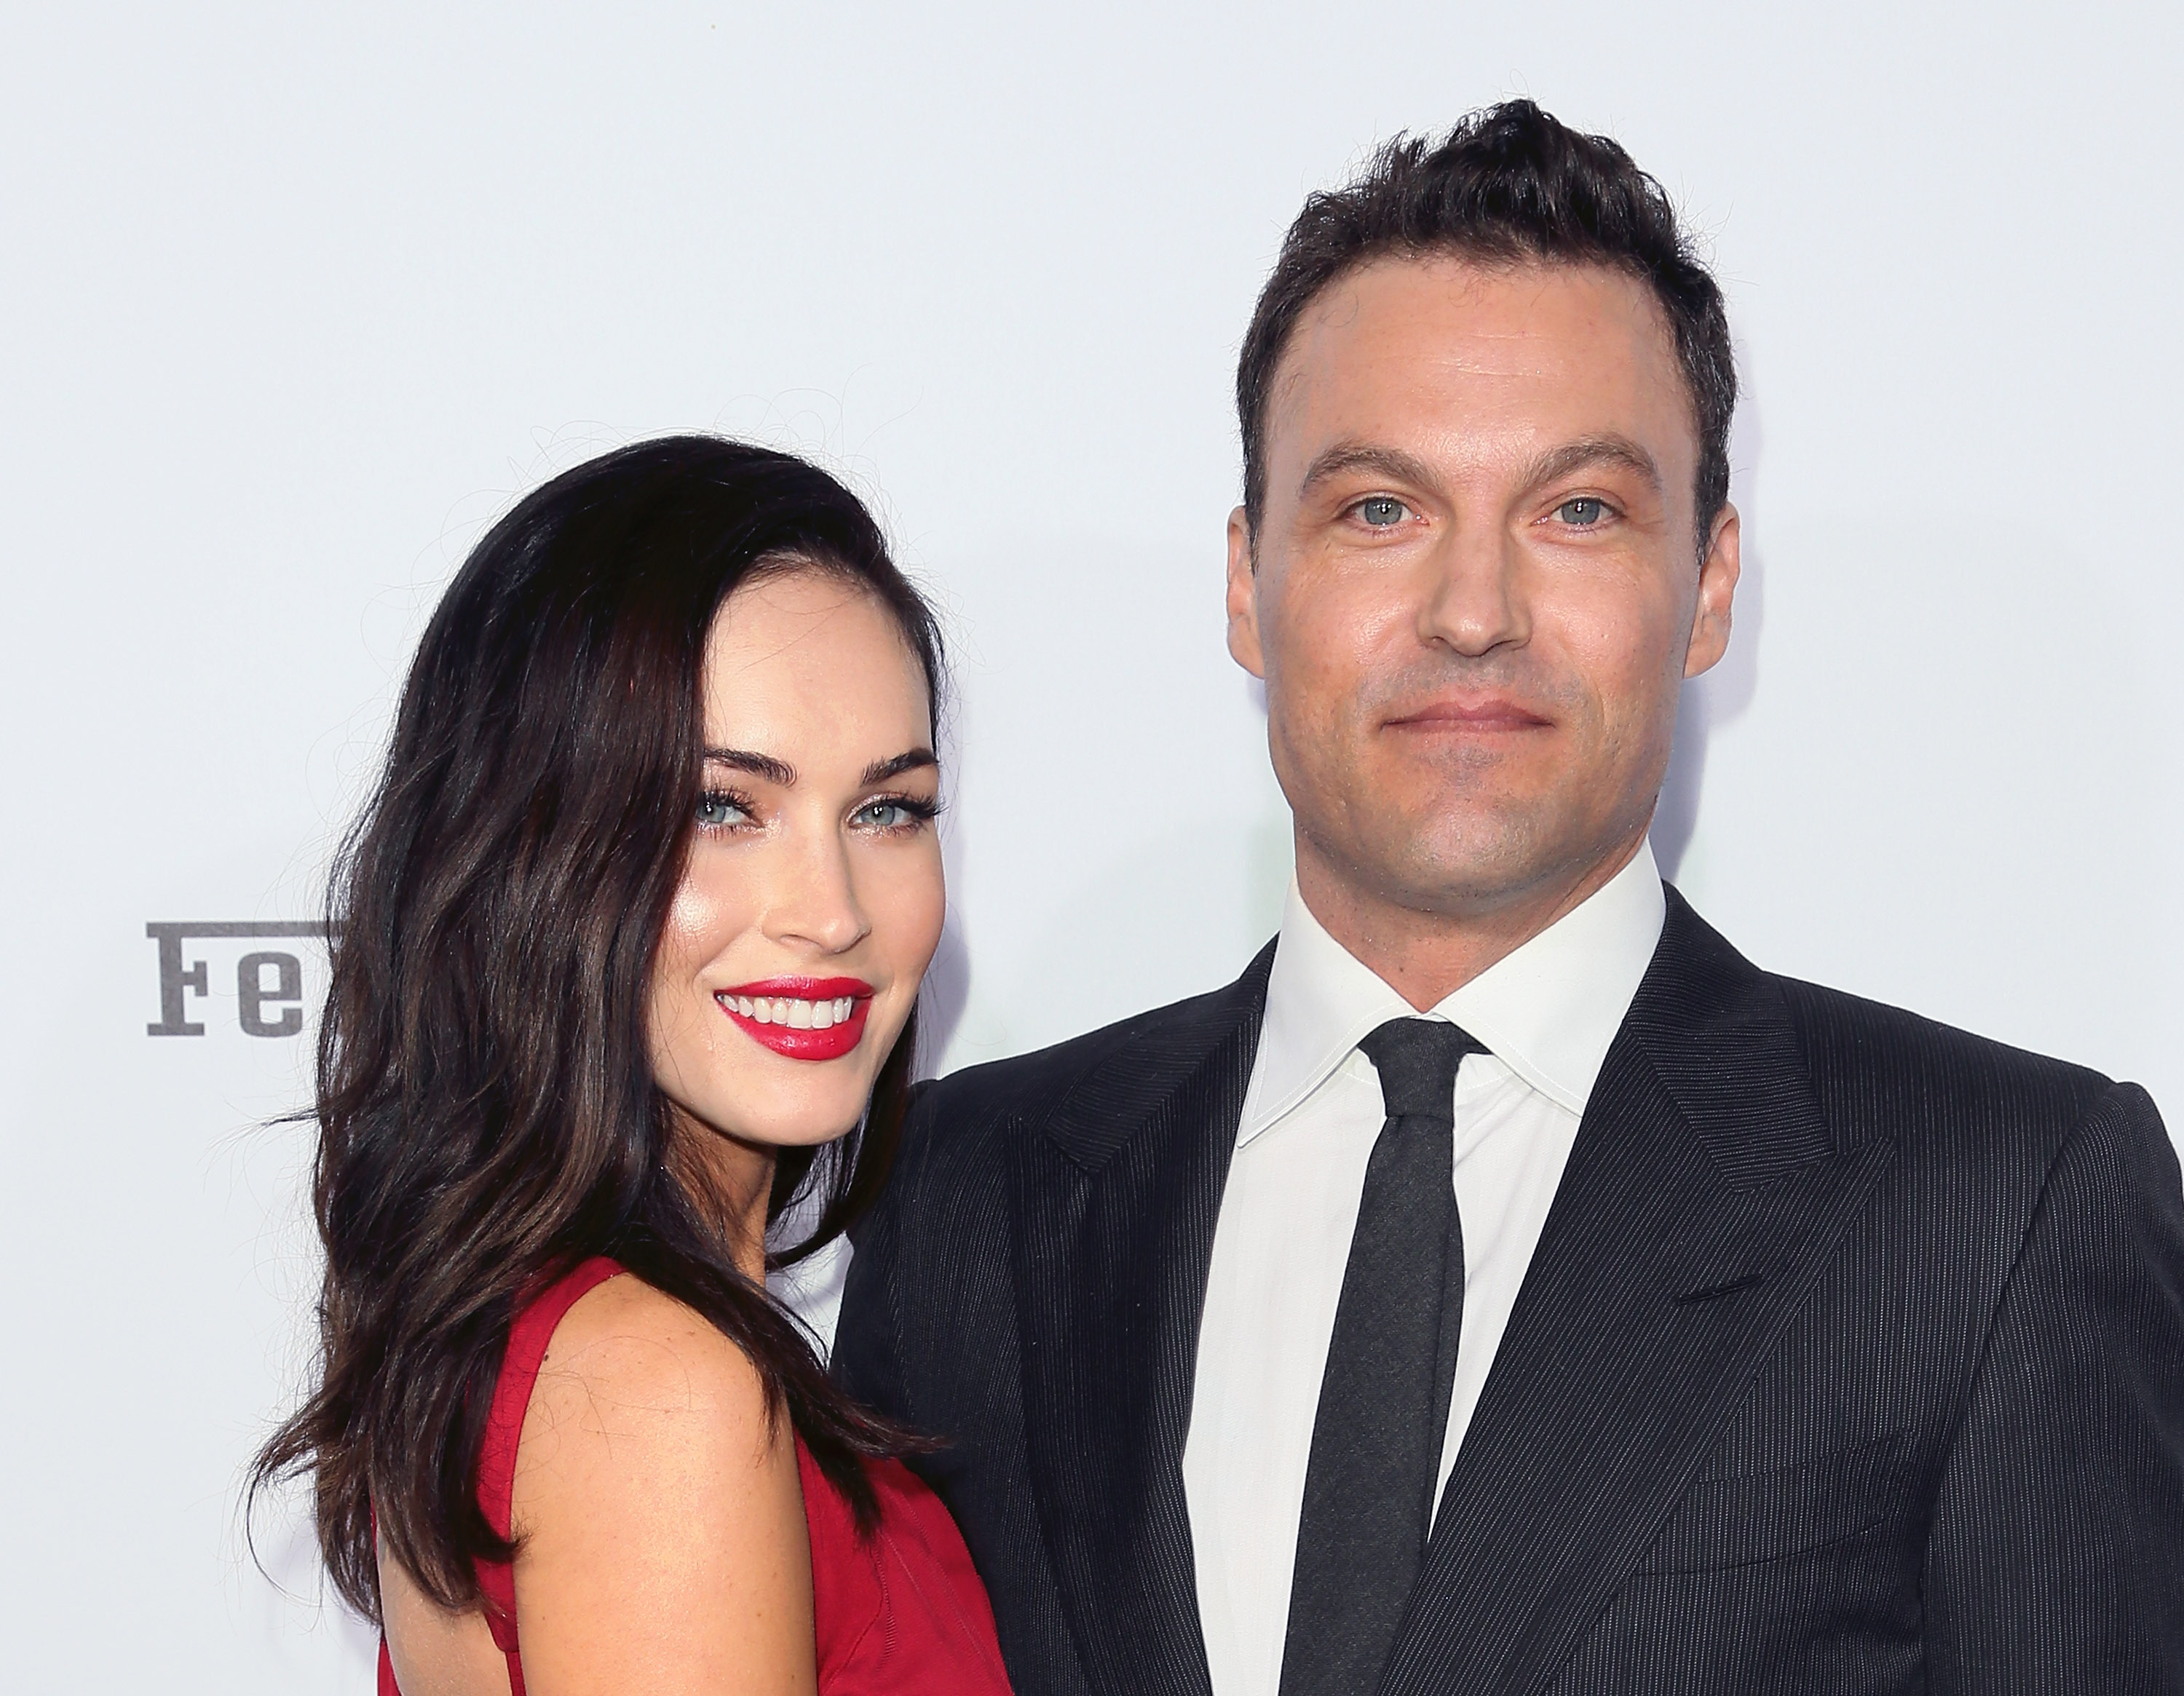 Megan Fox (L) and Brian Austin Green attend Ferrari's 60th Anniversary in the USA Gala at the Wallis Annenberg Center for the Performing Arts on October 11, 2014 in Beverly Hills, California.